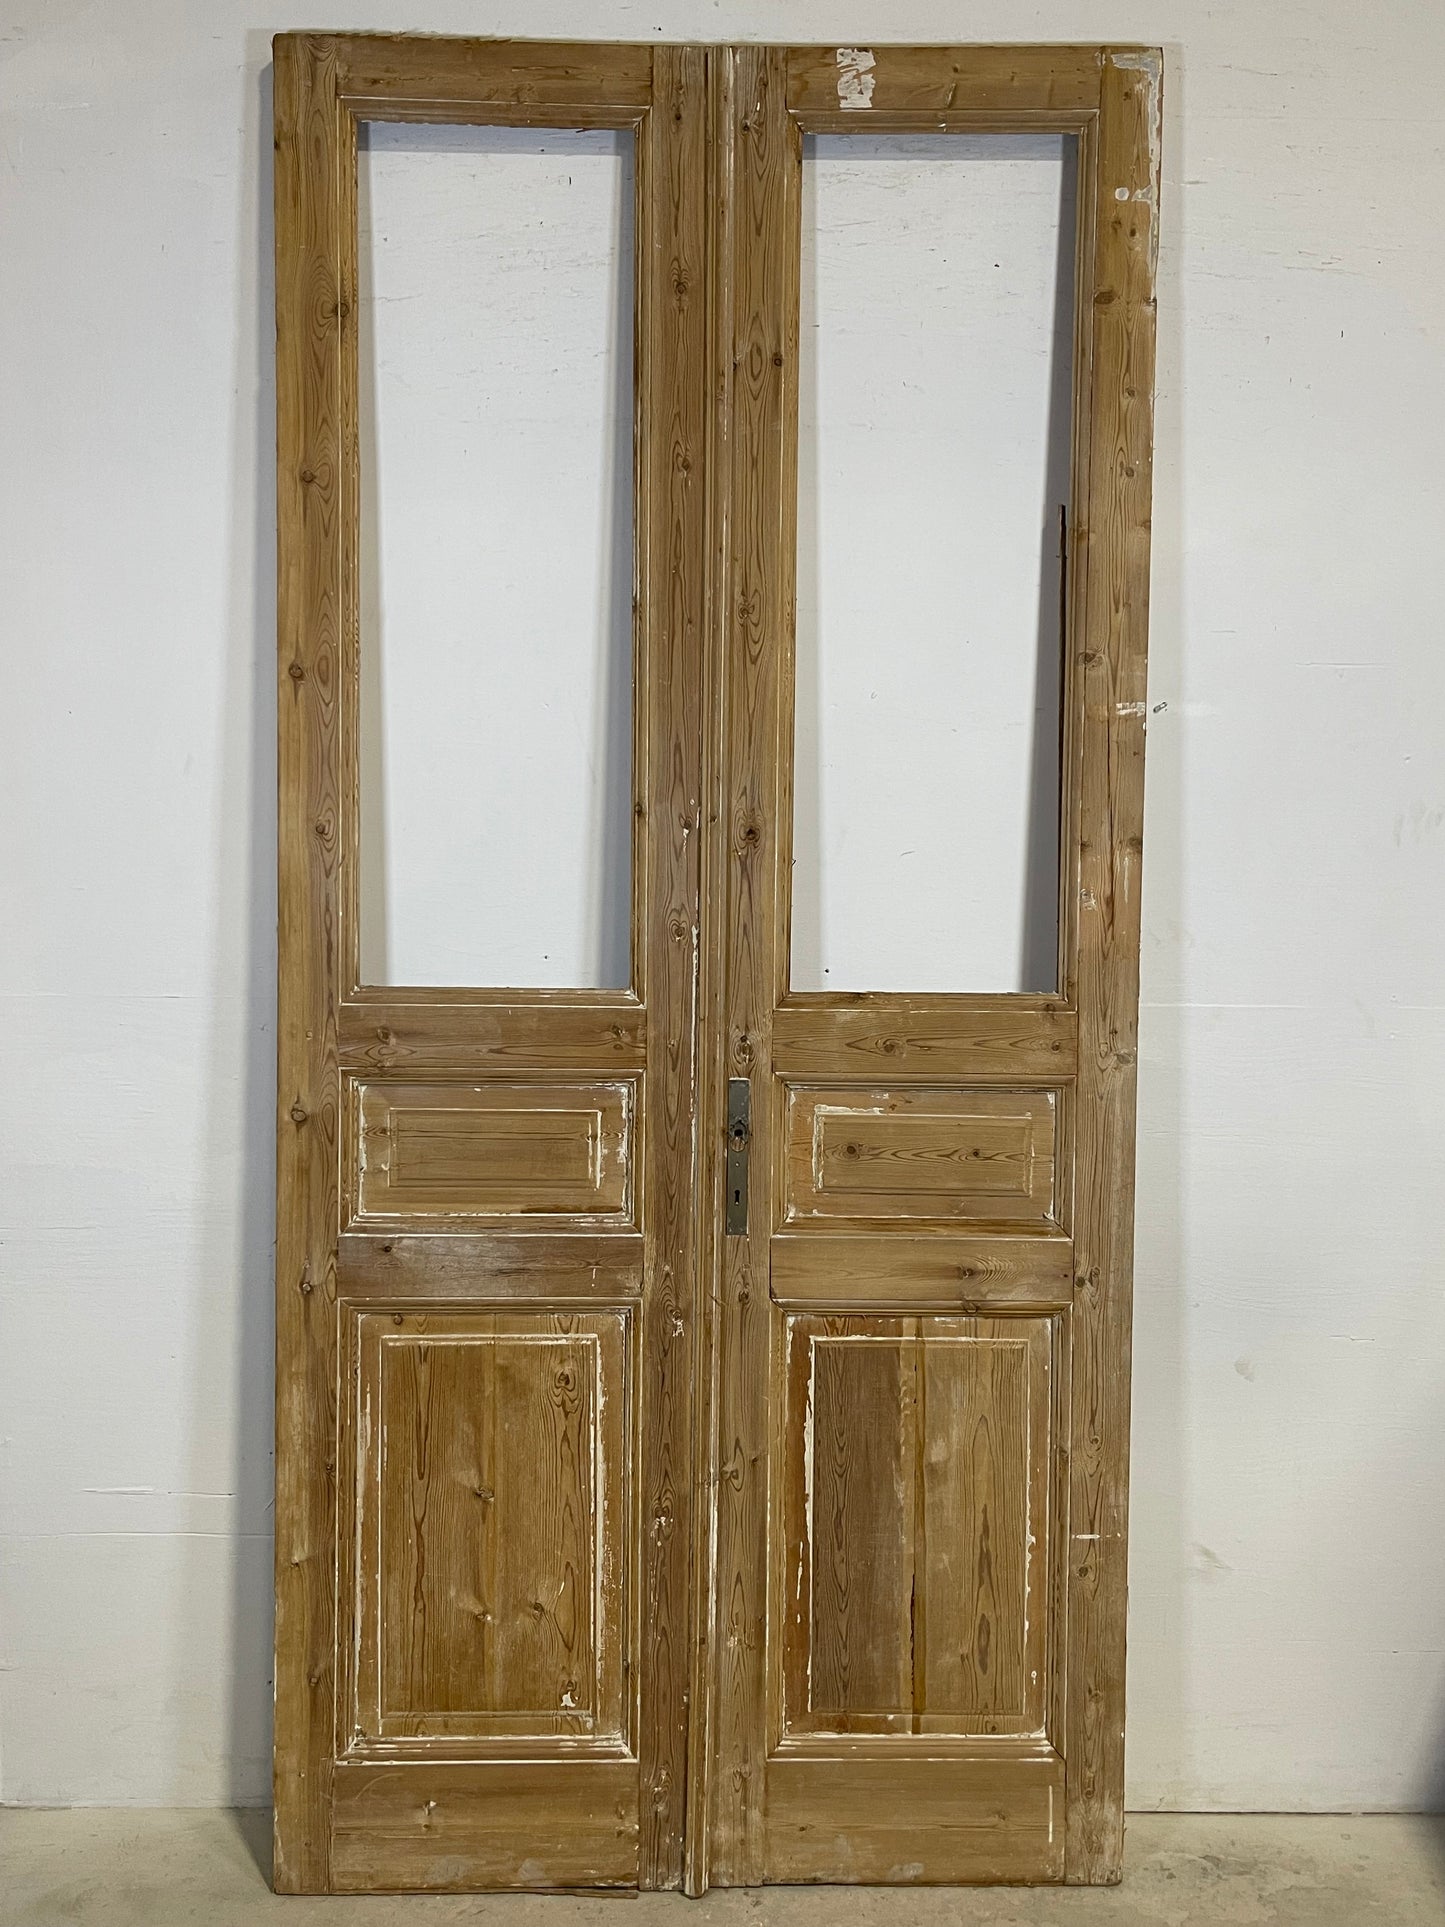 Antique French panel doors with glass (98.75 x 46.5) L355